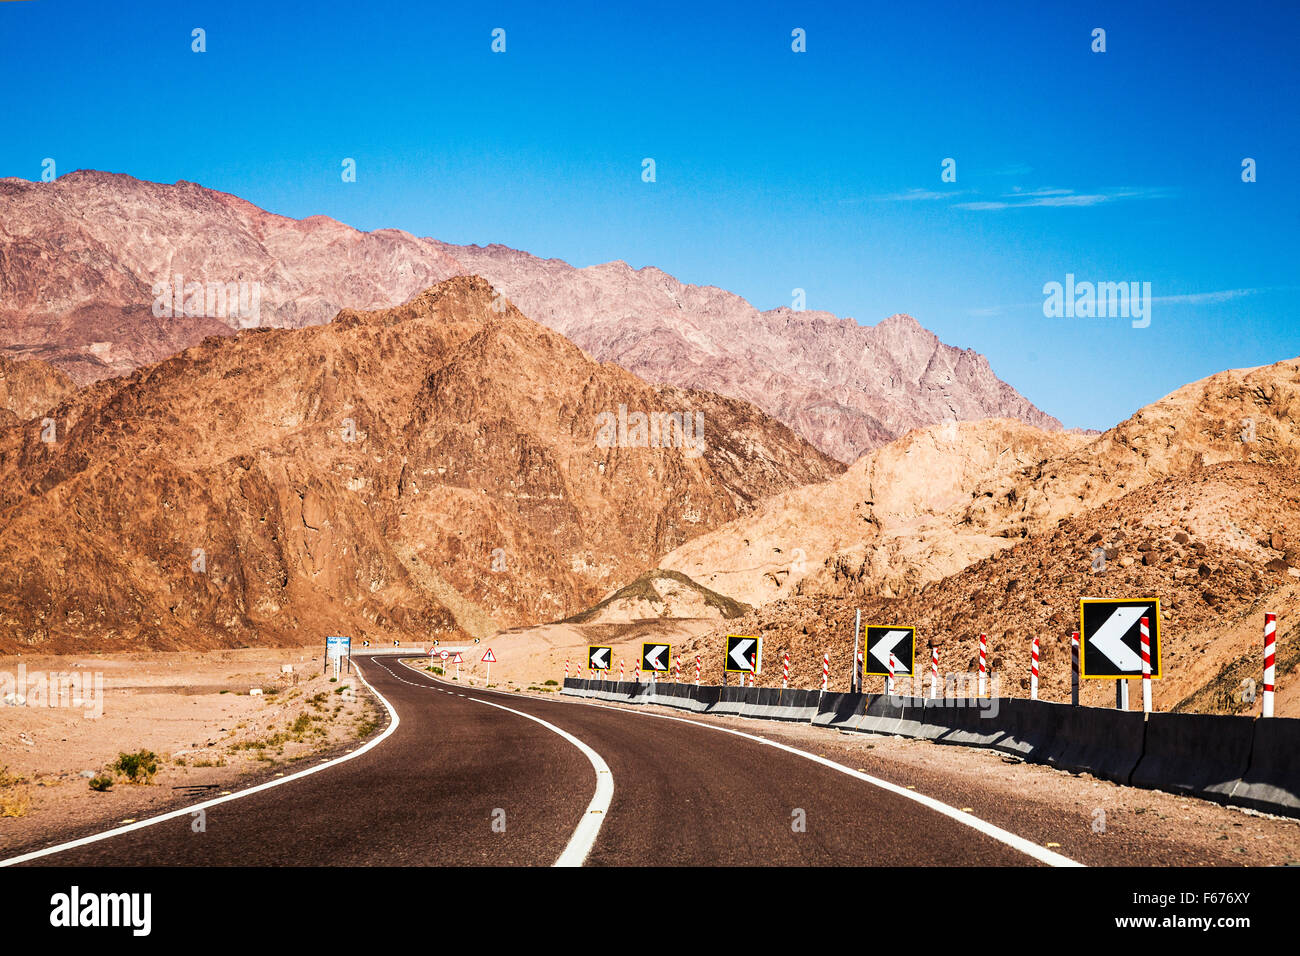 The desert landscape of the Sinai Peninsula on the road from Dahab to Eilat in Egypt. Stock Photo